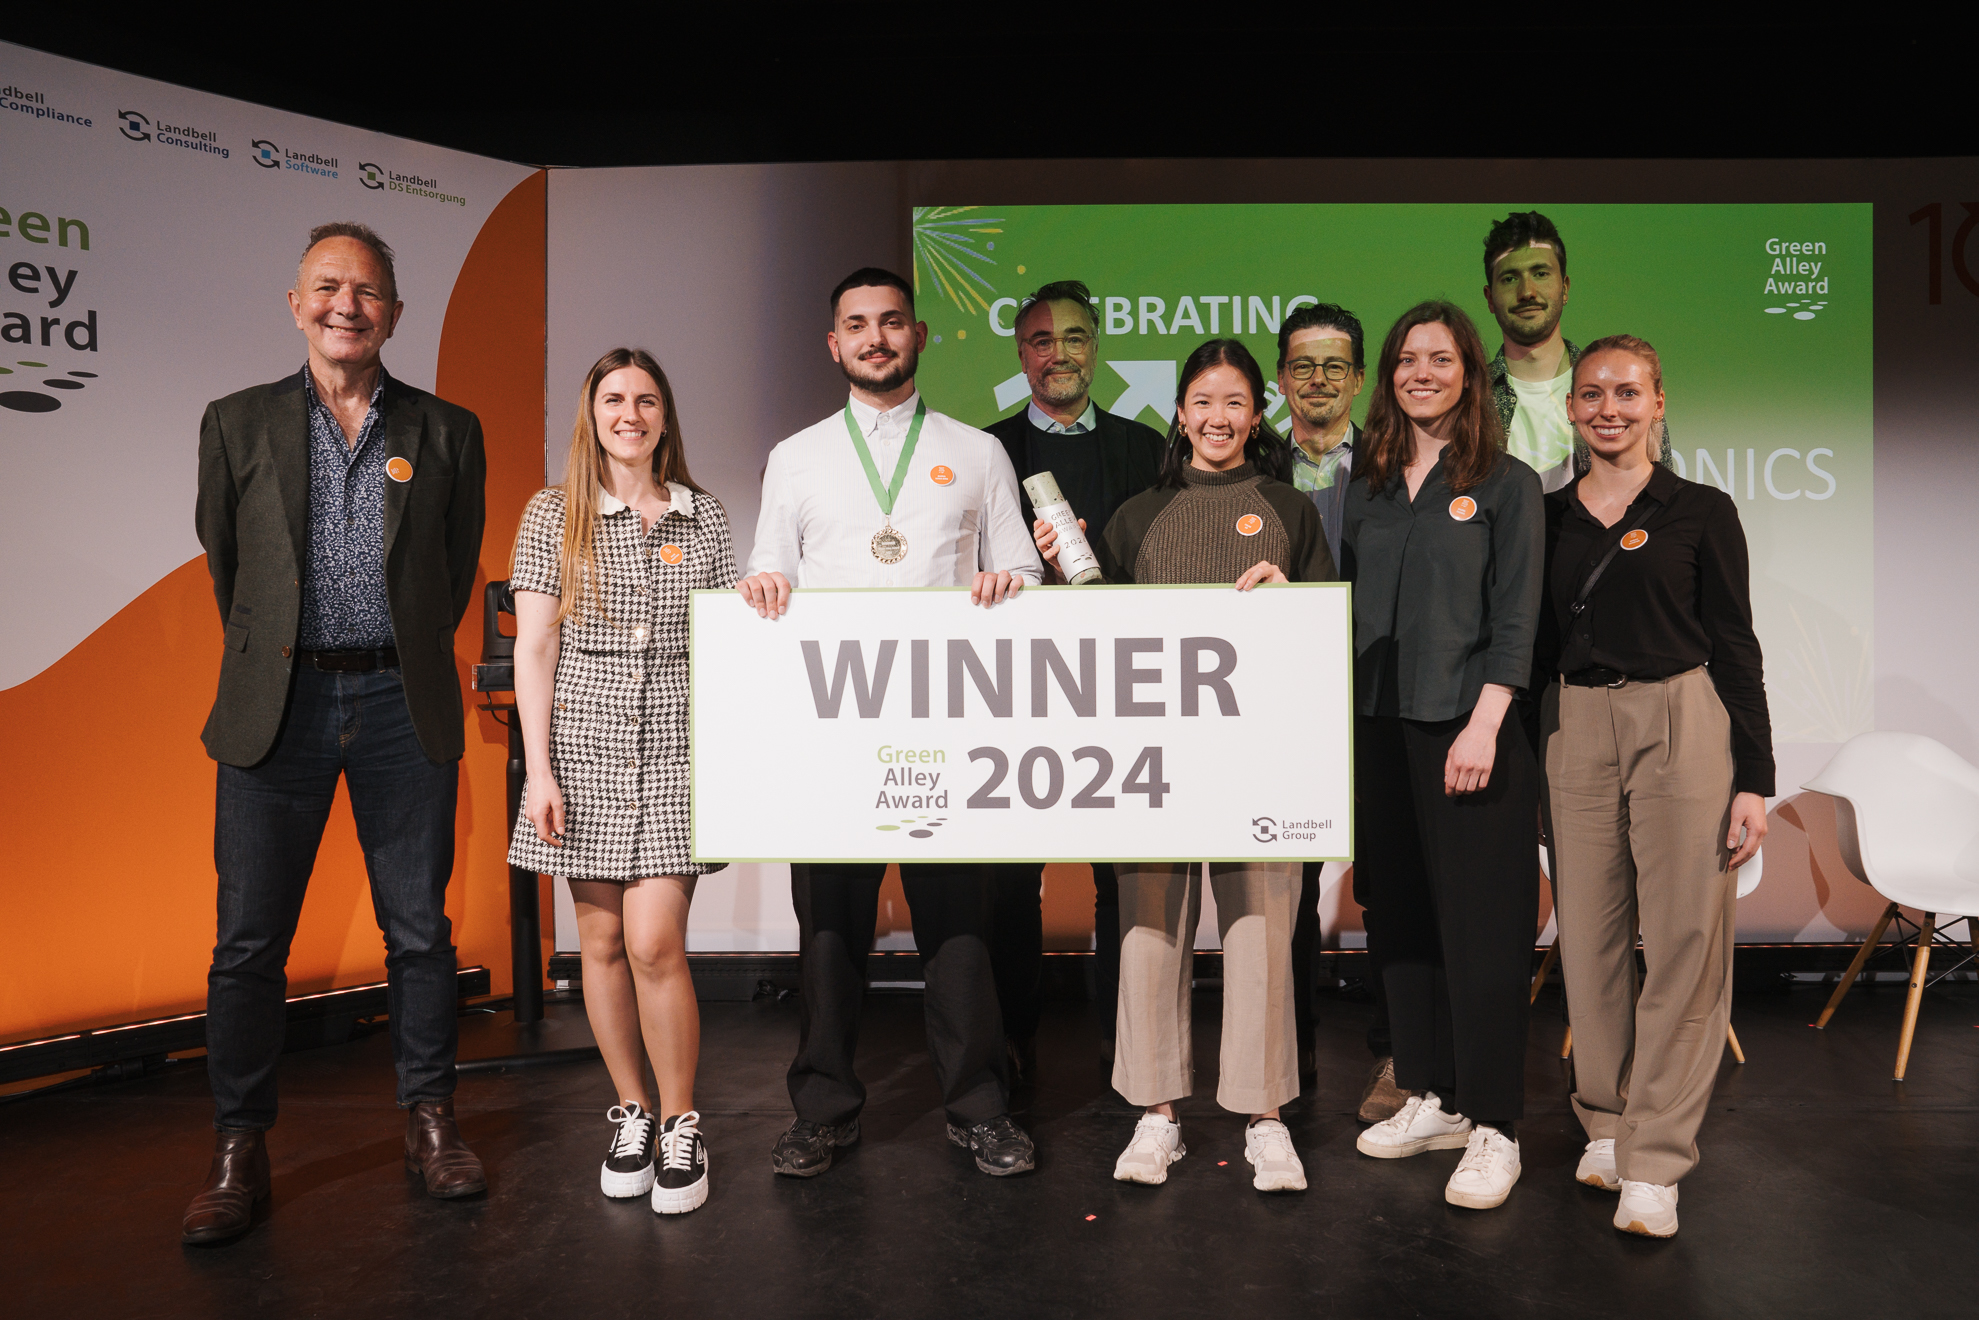 Green Alley Award PulpaTronics wins 2024 competition